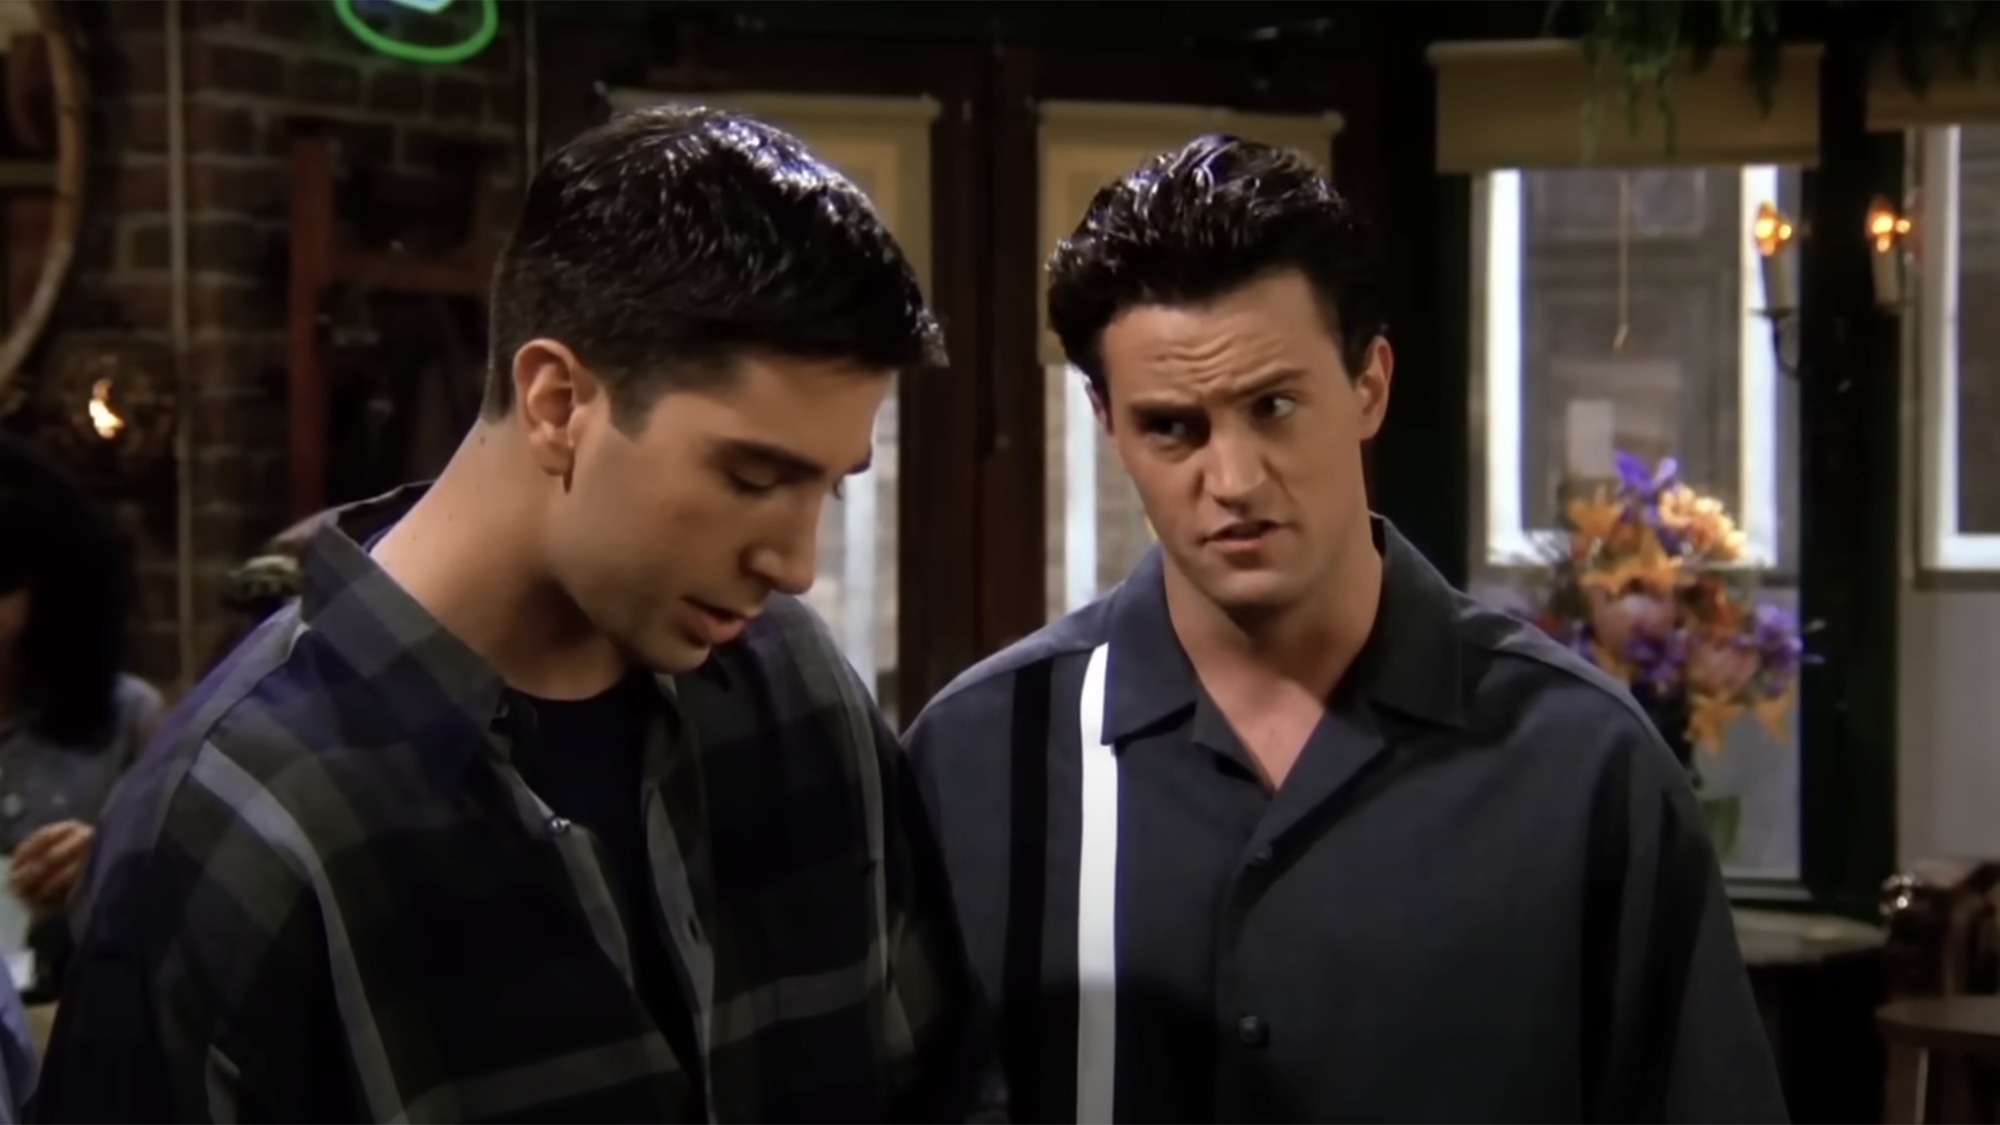 Neural network trained on 'Friends' can recognize sarcasm